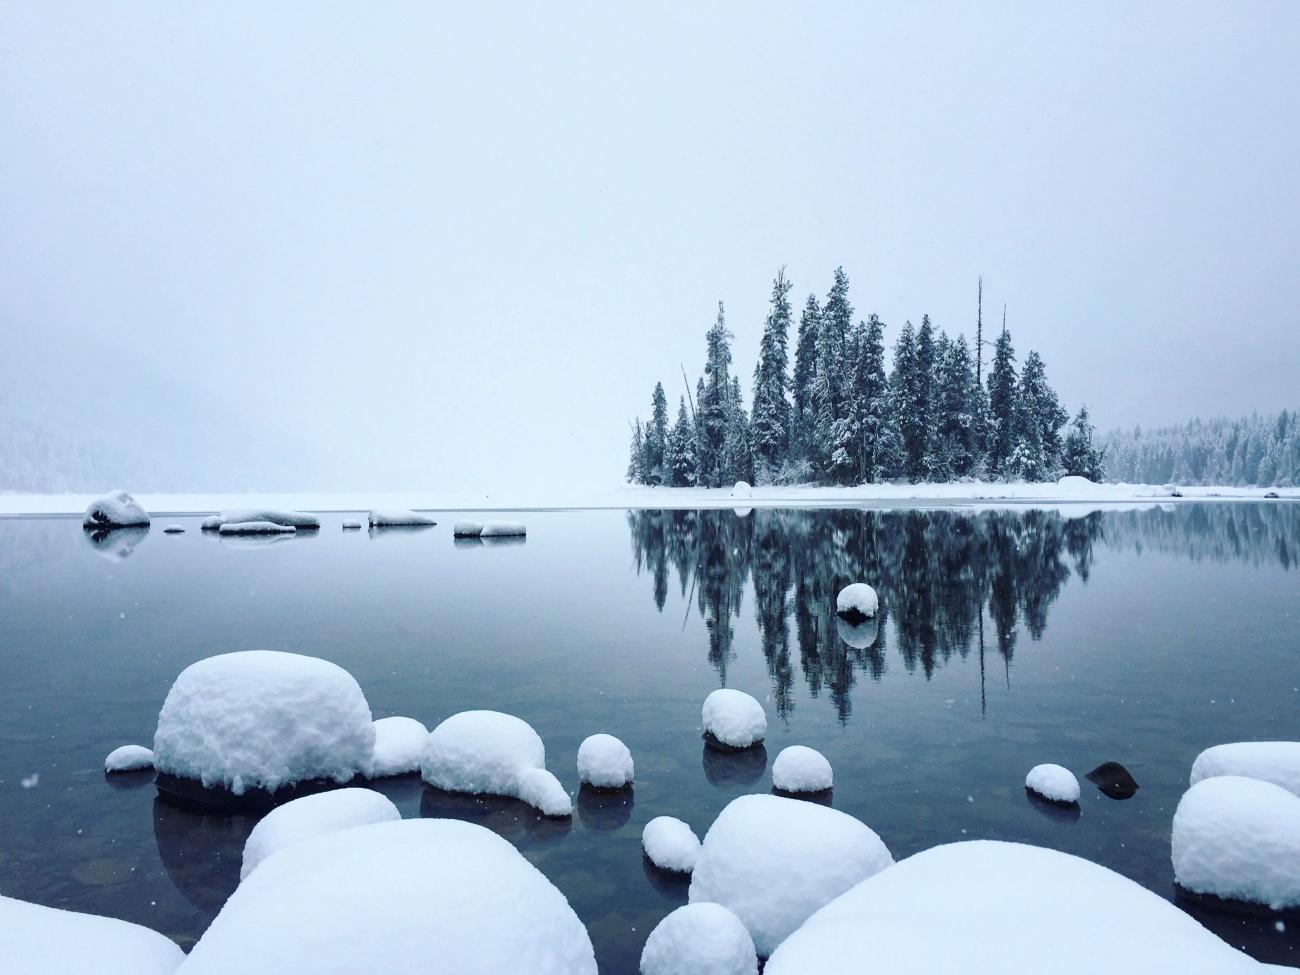 A lake in winter is surroudned by snow. There is a small island with evergreen trees in the distance.